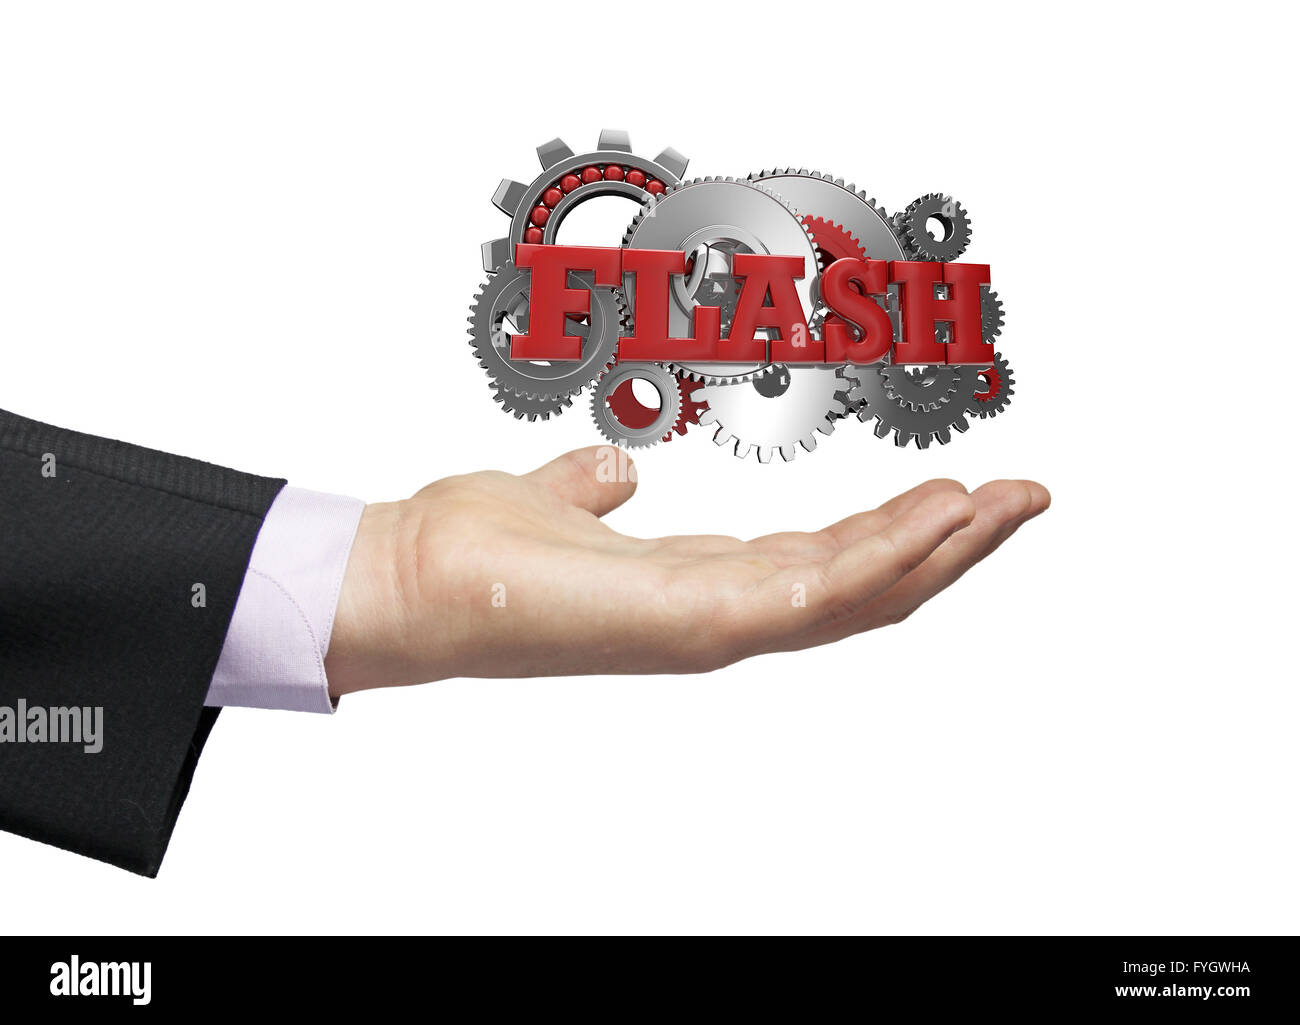 gears with text flash over a businessman hand Stock Photo